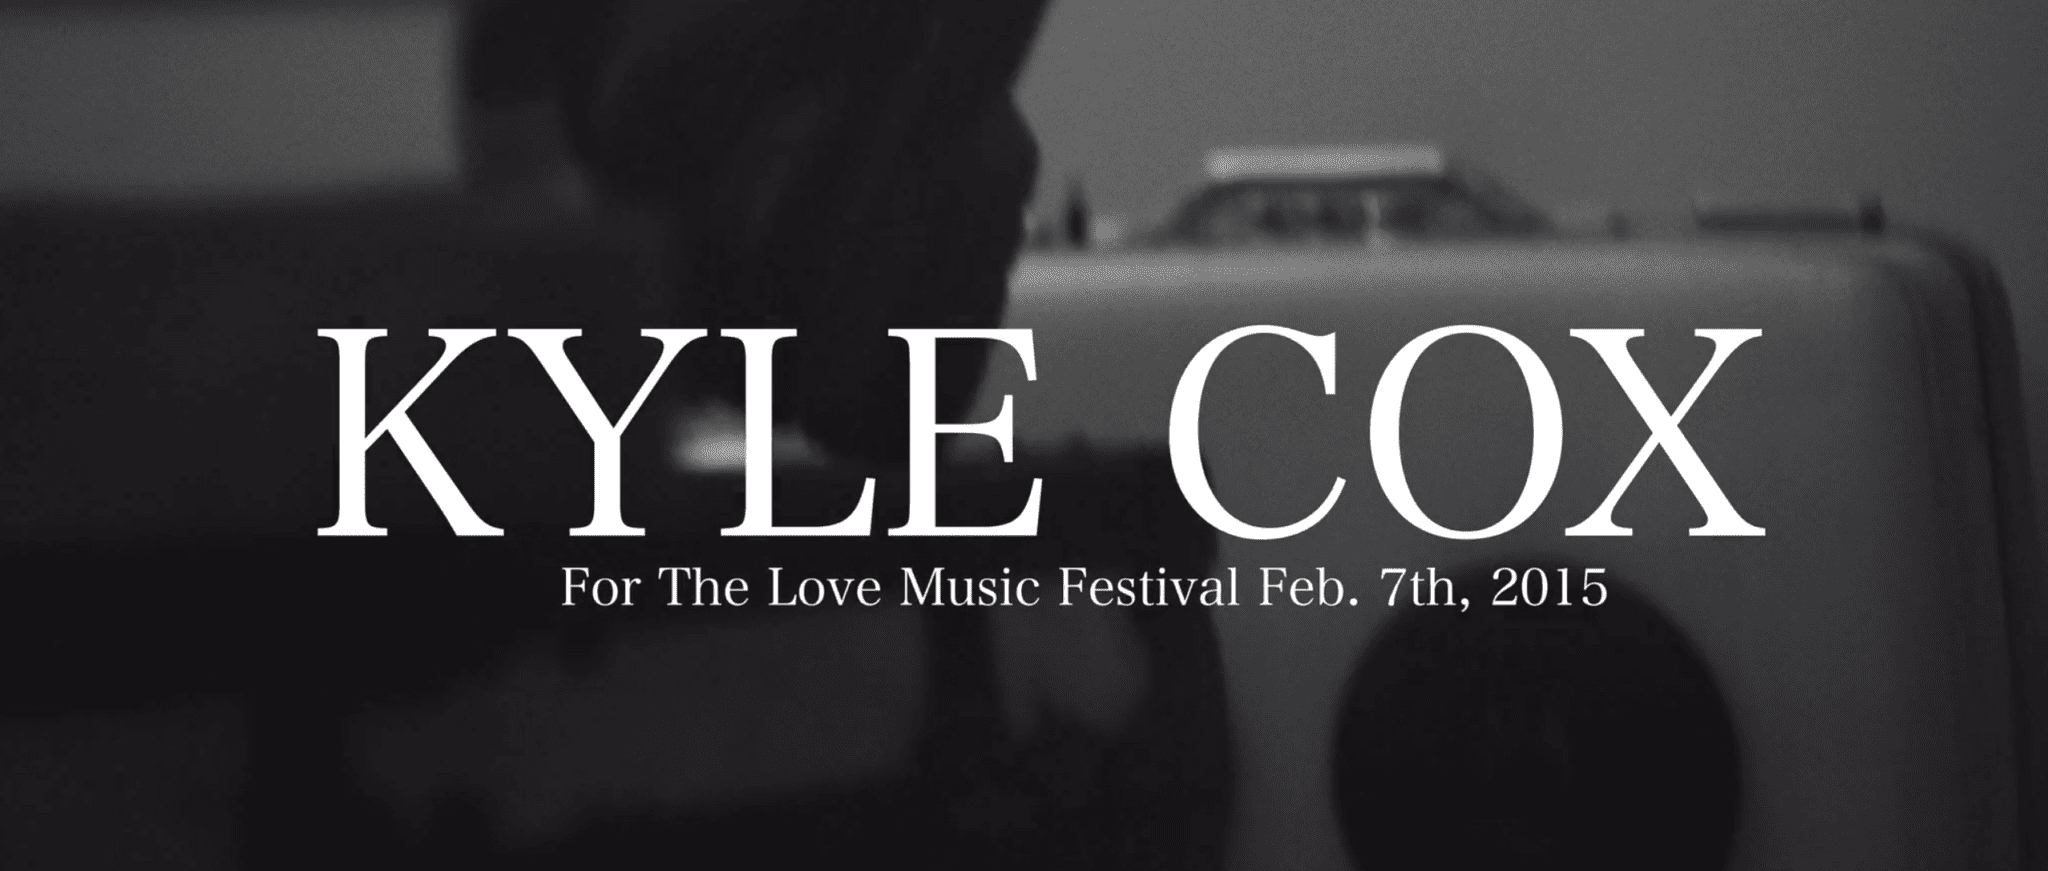 Black and white ad for For The Love Music Festival, featuring Kyle Cox